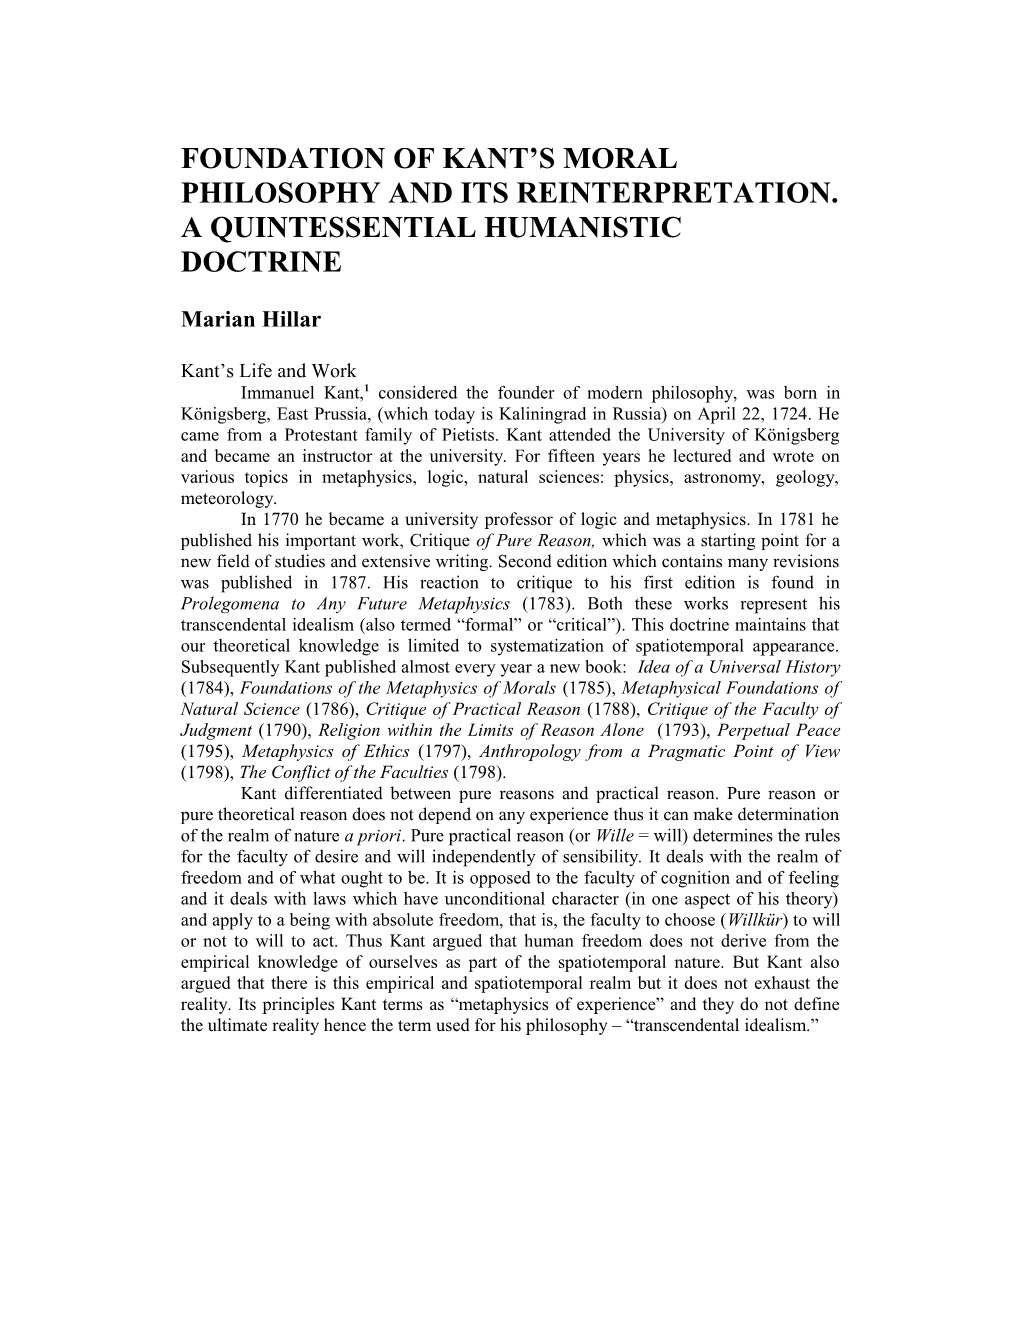 FOUNDATION of Kant S Moral Philosophy and Its Reinterpretation. a Quintessential Humanistic